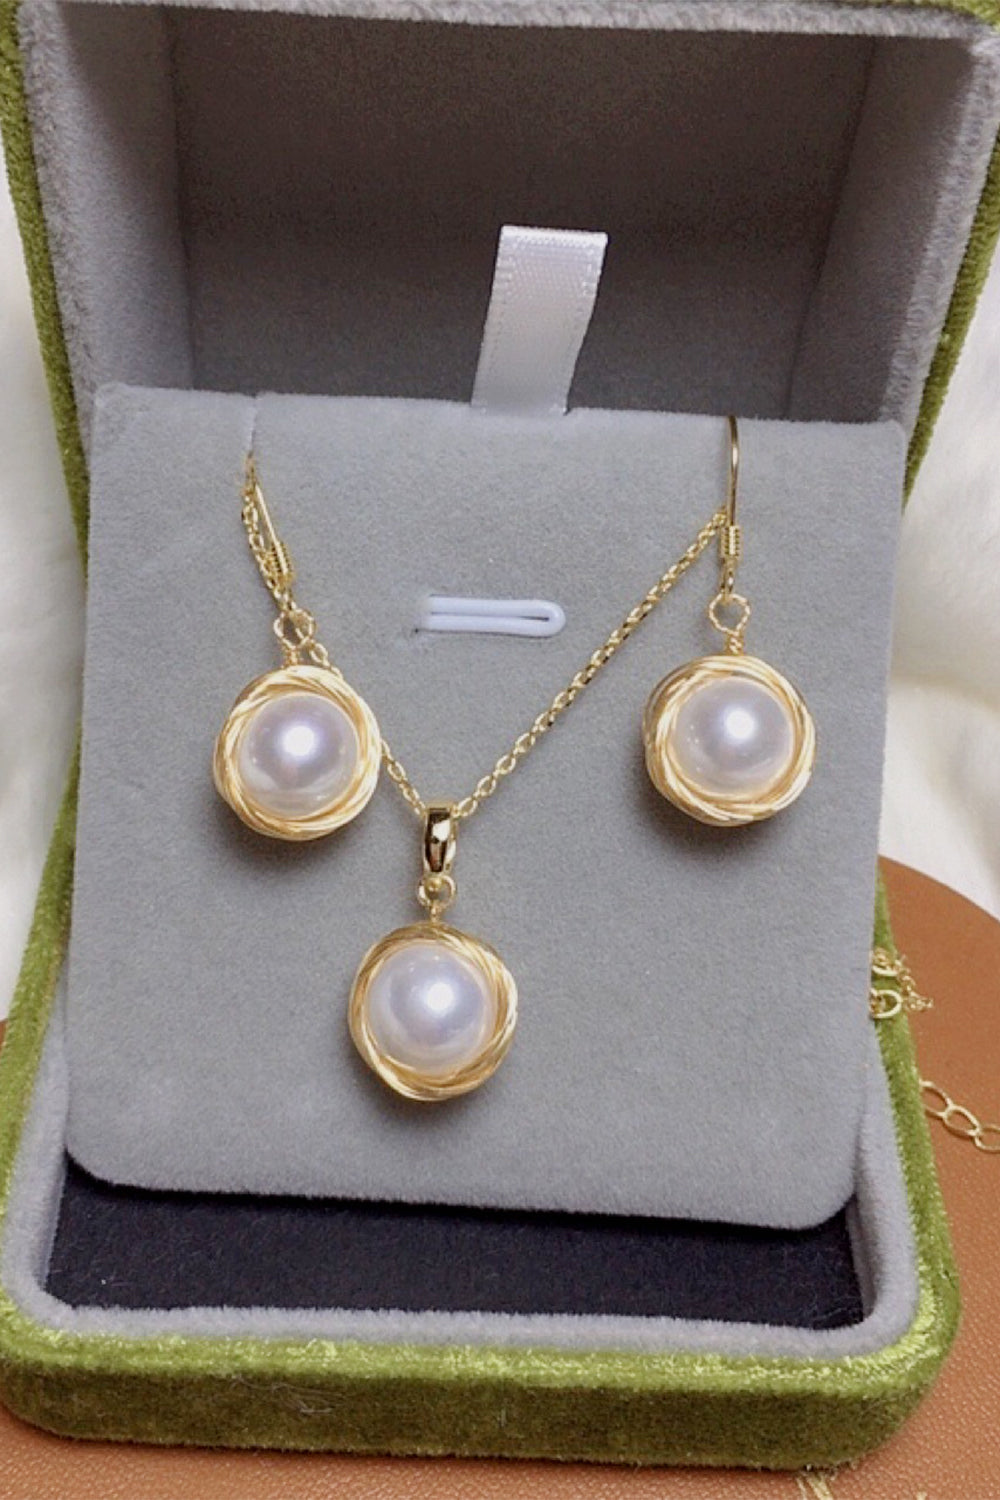 KissProm White Pearl Earrings & Necklace Sets